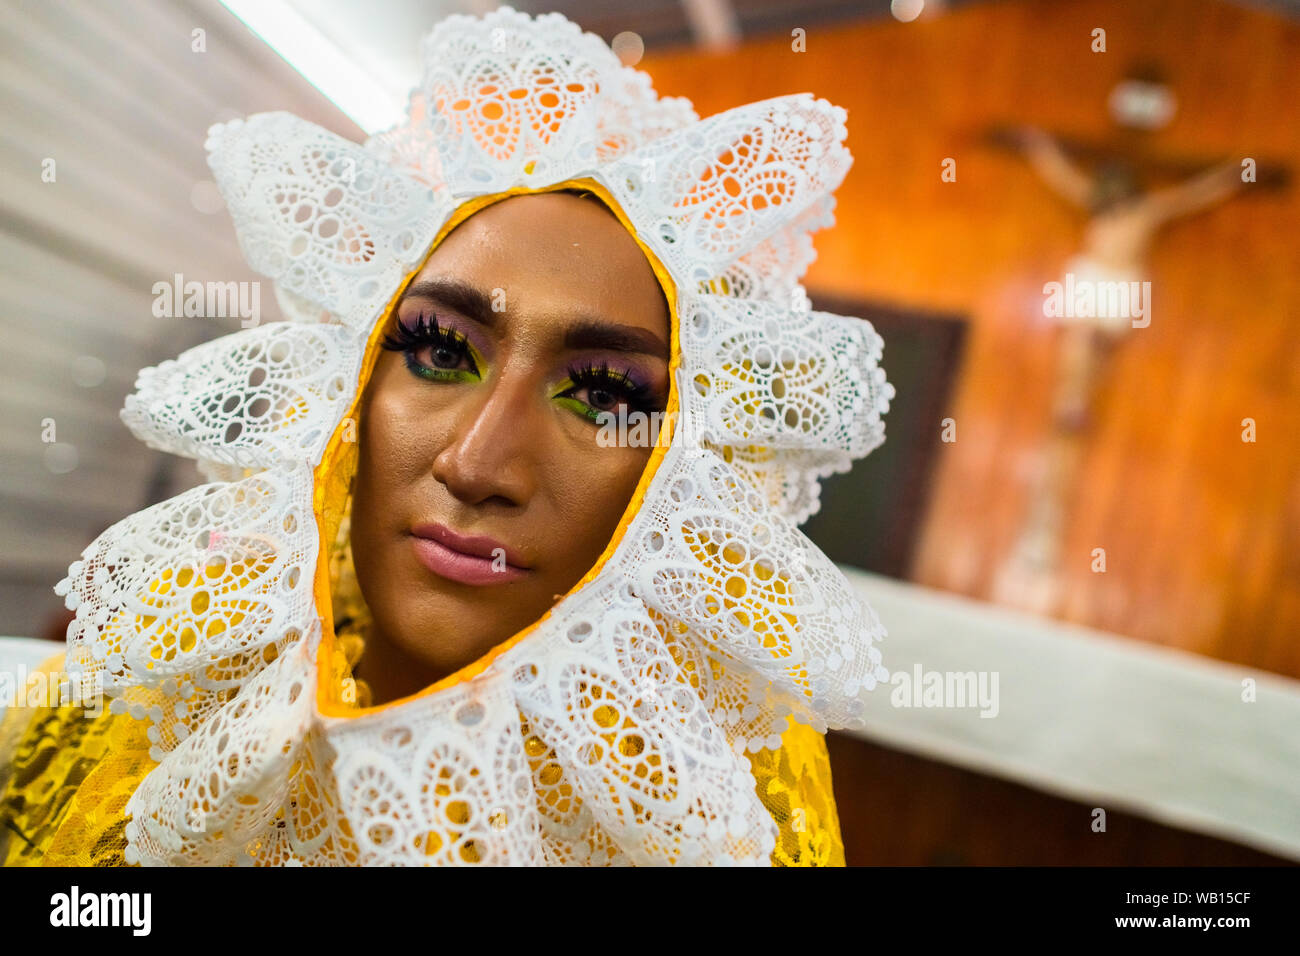 A Mexican “muxe” (typically, a homosexual man wearing female clothes) participates in the festival in Juchitán de Zaragoza, Mexico. Stock Photo